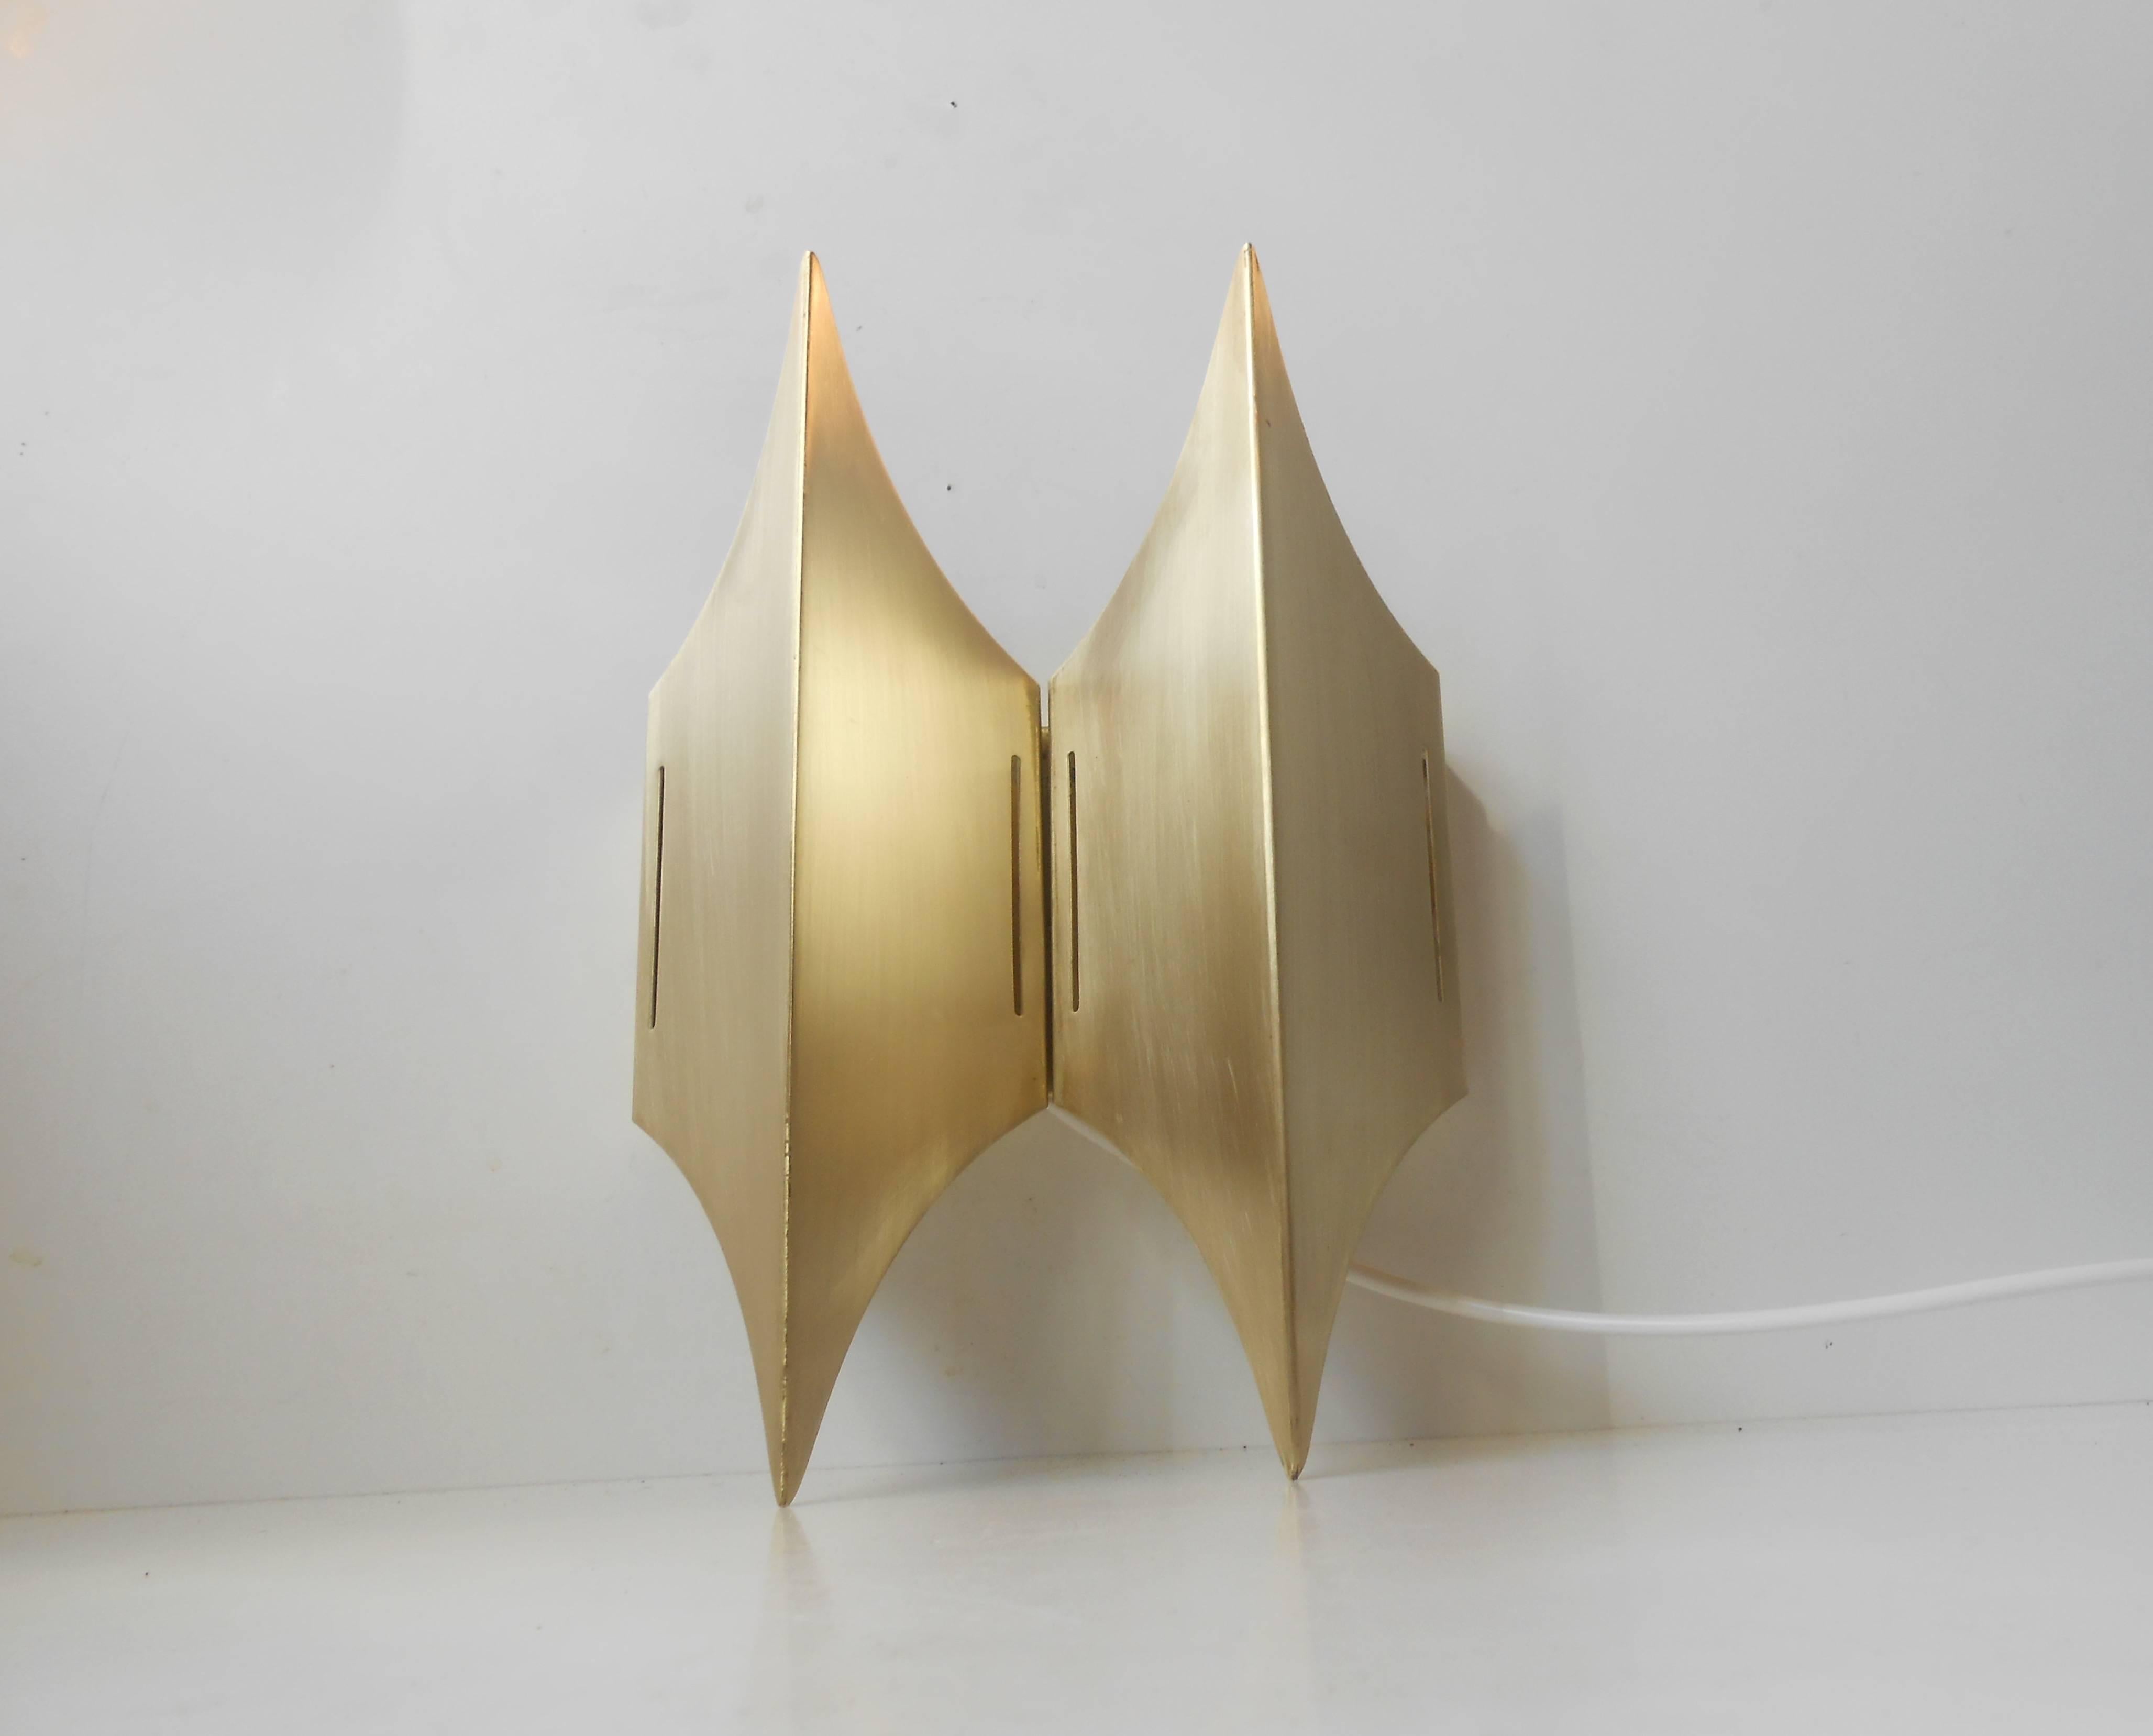 Sculptural brass wall sconce: Lyfa 'Gothic' II designed anonymously in the mid-1960s. Measurements: Height 11 inches (28 cm), width 8.25 inches (20.5 cm). We provide free worldwide shipping on this item.